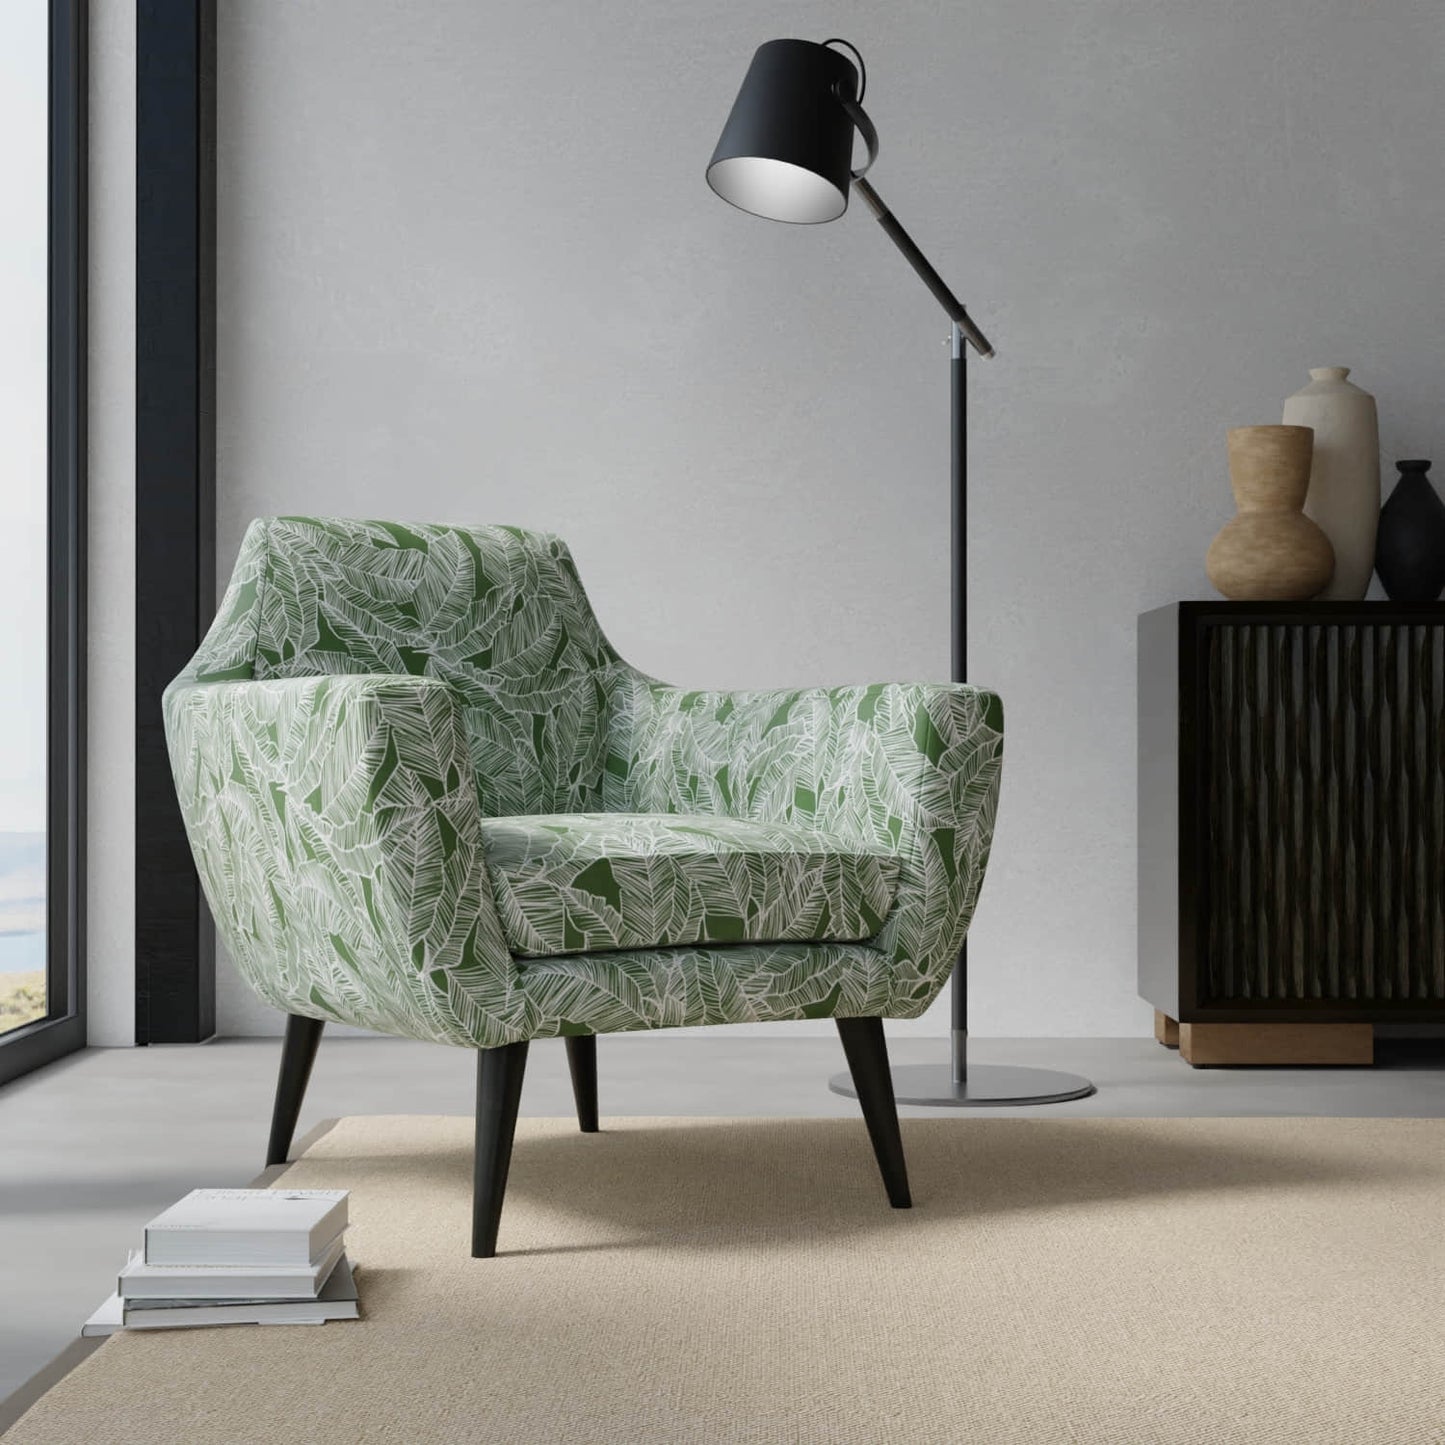 Camilla Jungle upholstered on a contemporary chair